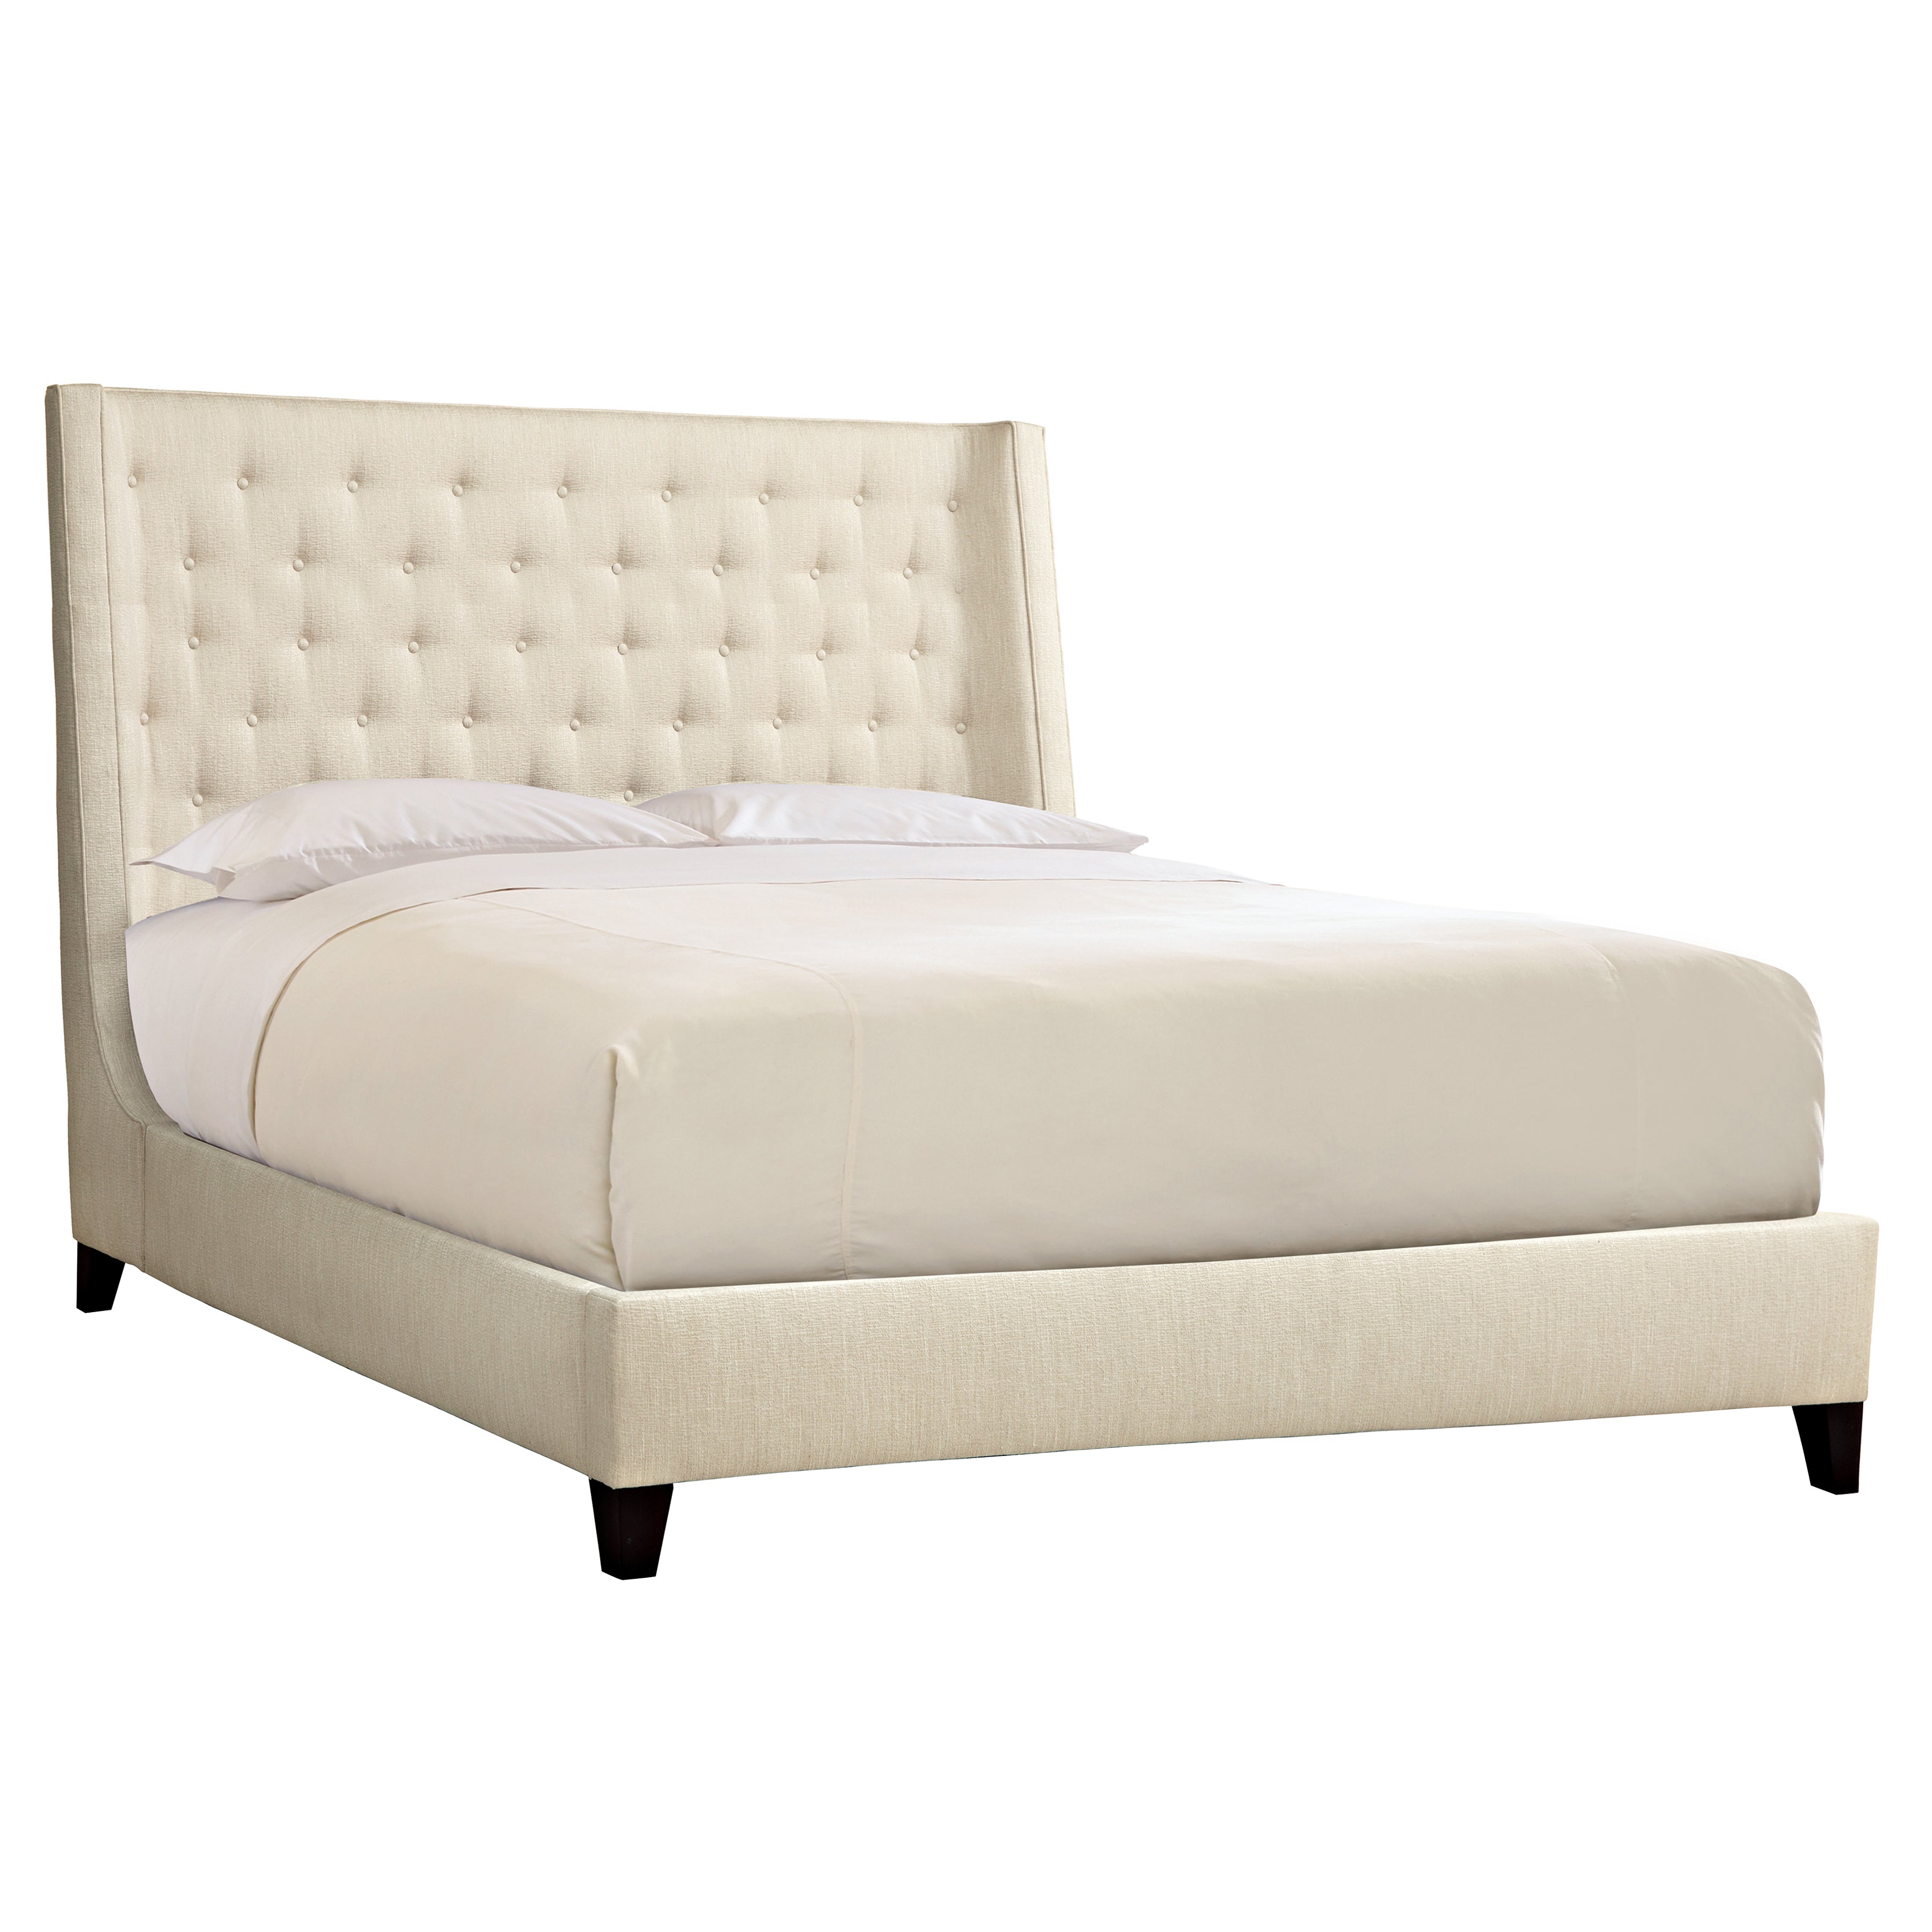 Maxime King Shelter Bed with Tall Button Panel Headboard (68.5-inches)